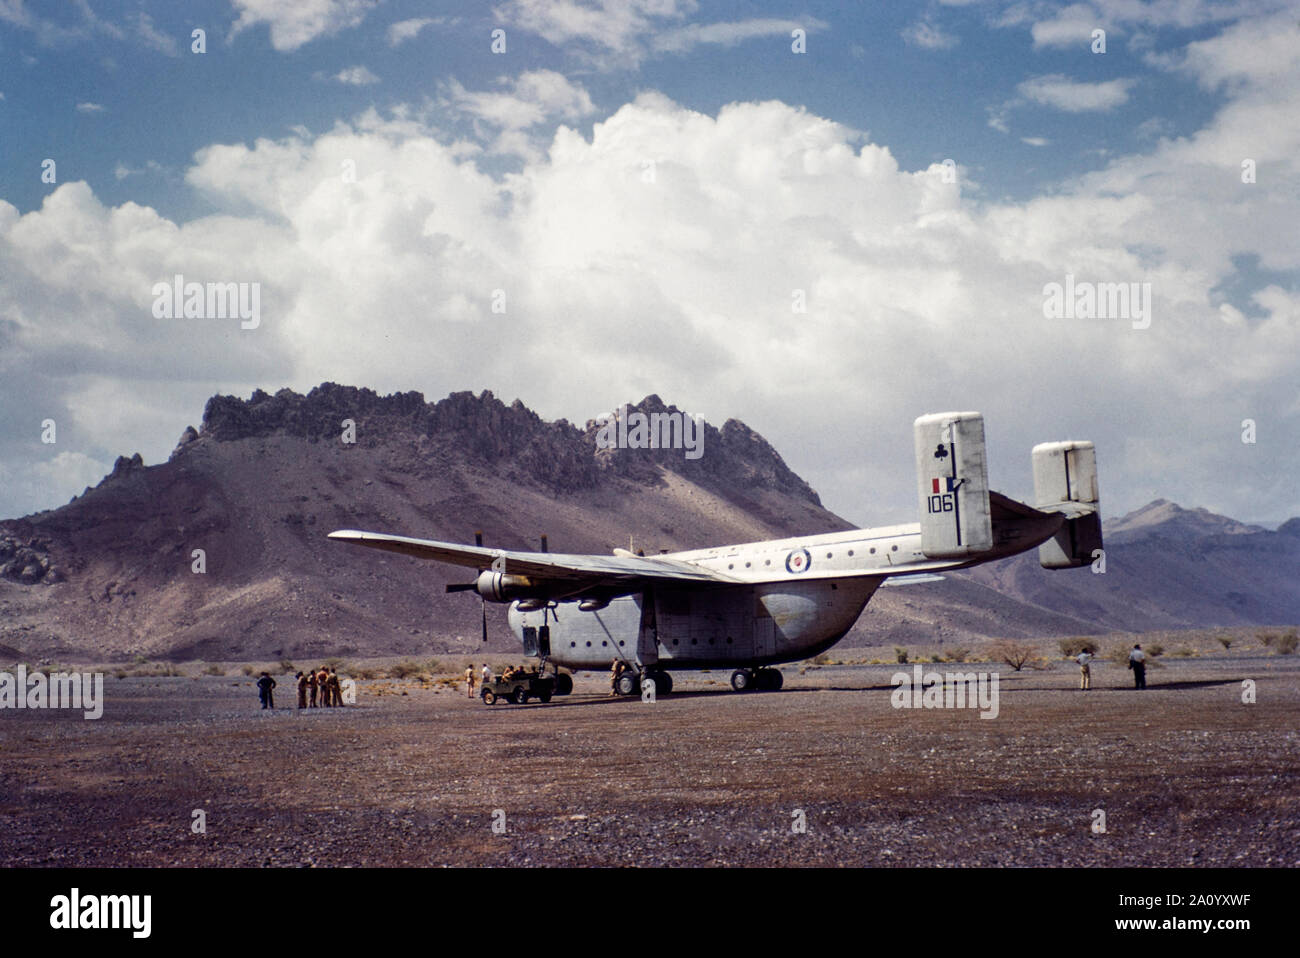 A Blackburn B-101 Beverley heavy transport aircraft operated by the Royal Air force Transport Command at RAF Khormaksar in Aden, Yemen in 1962. Stock Photo